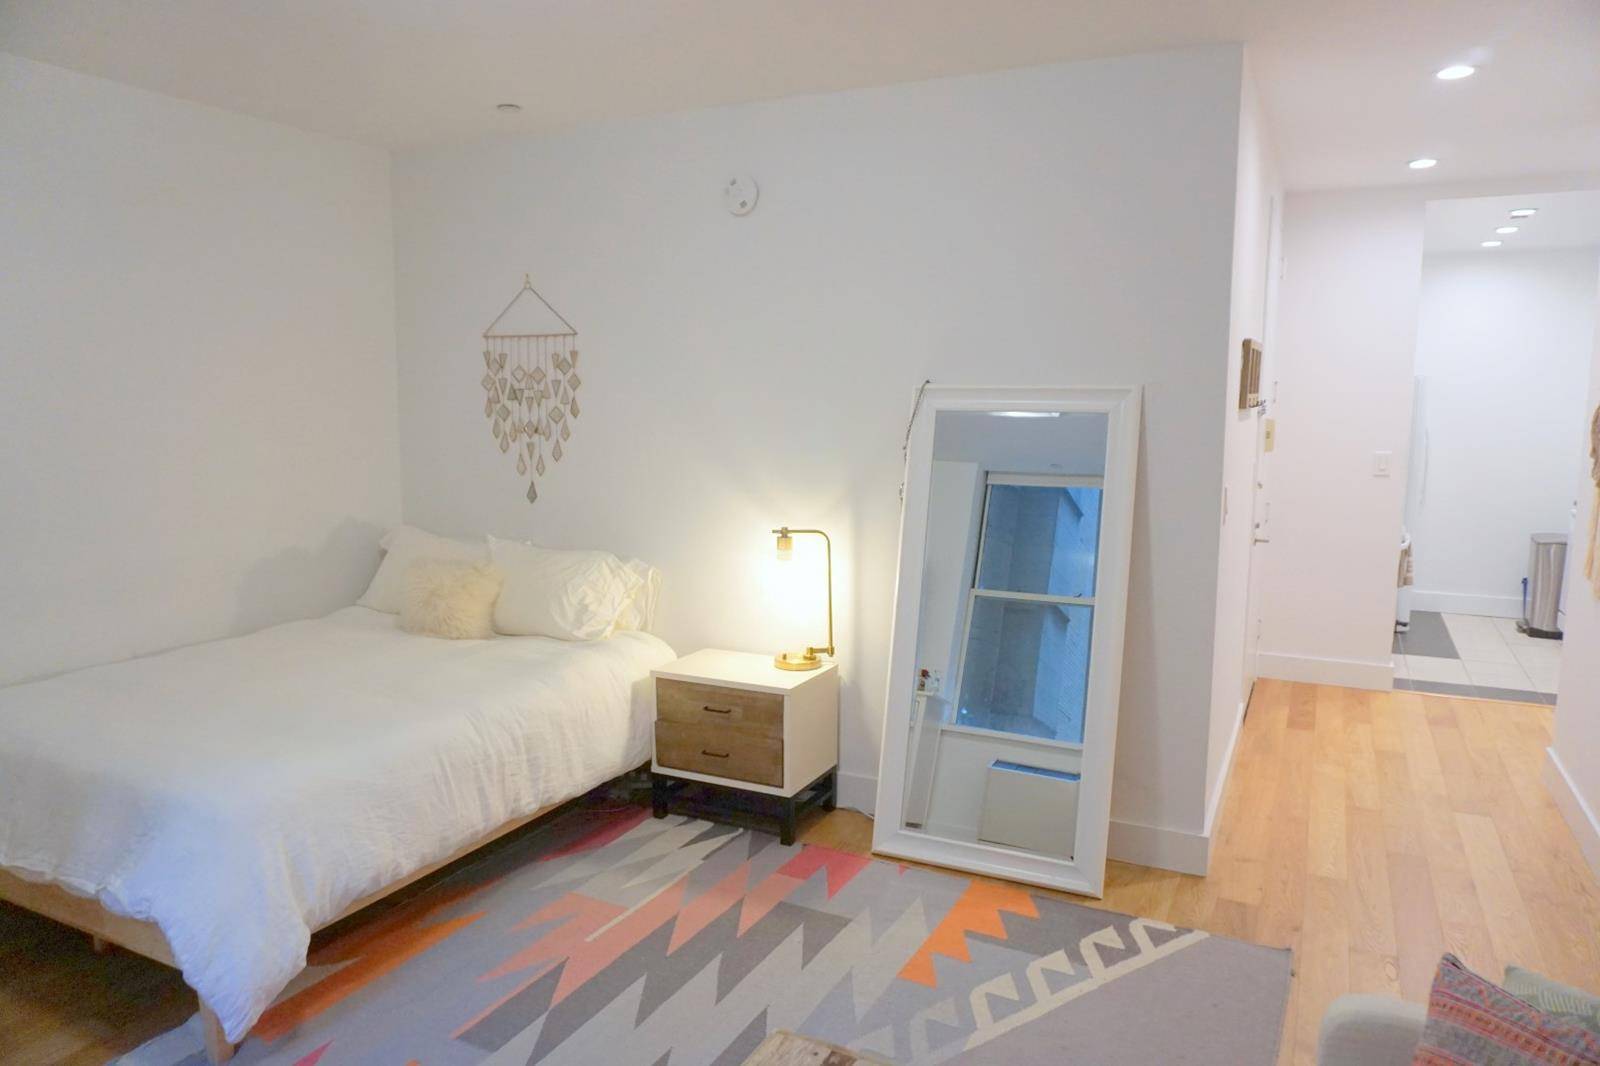 Spacious TRIBECA STUDIO with high beamed ceilings, great closet space, plank flooring, granite kitchen with stainless steel appliances and large windows.